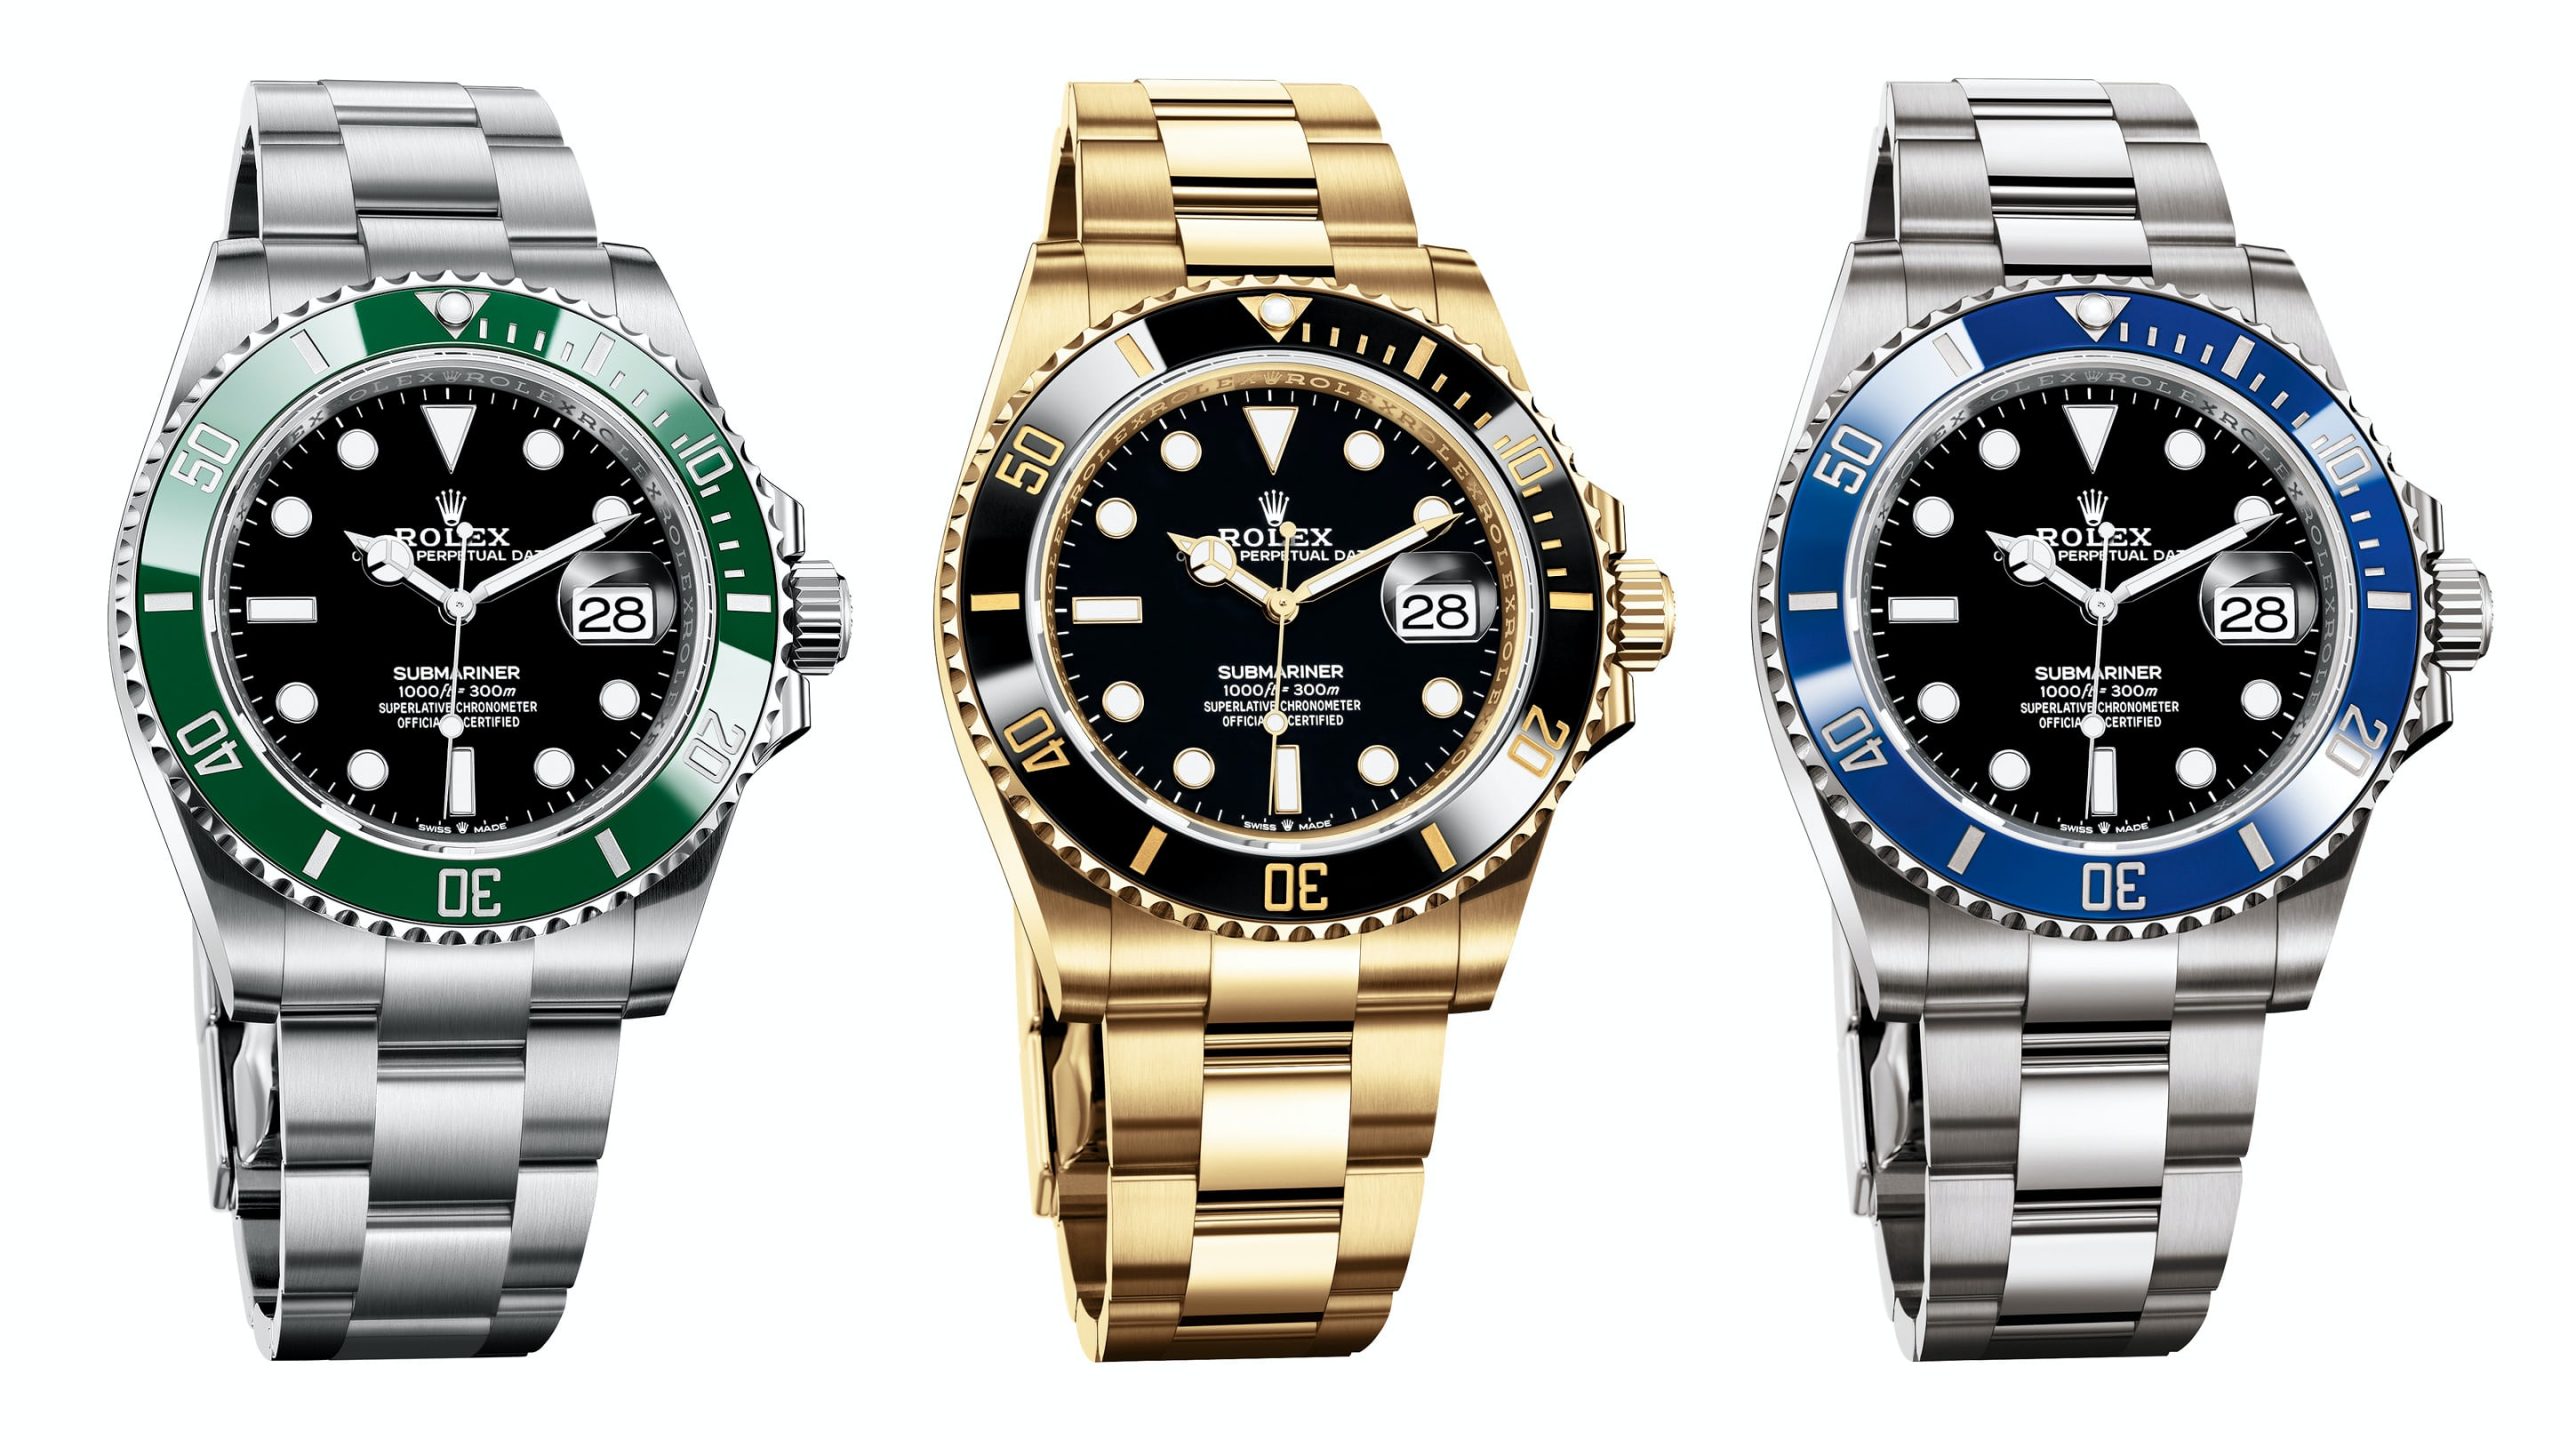 price of a new rolex submariner